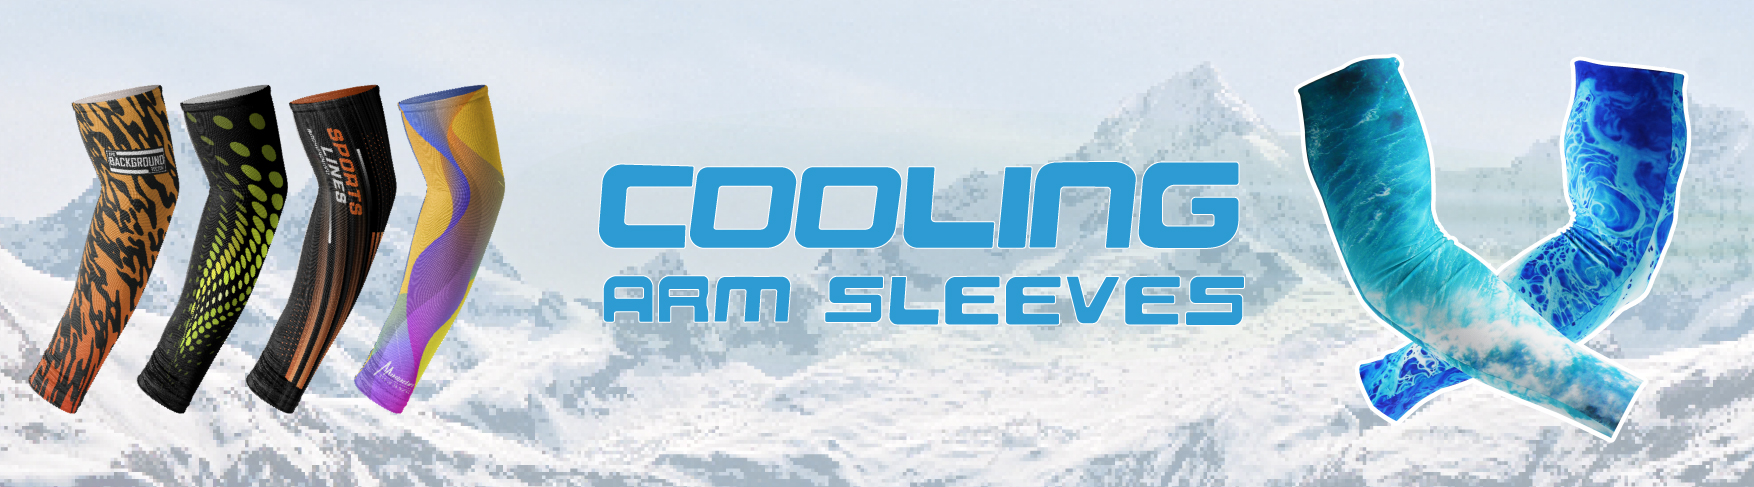 Cooling Arm Sleeeves Banner